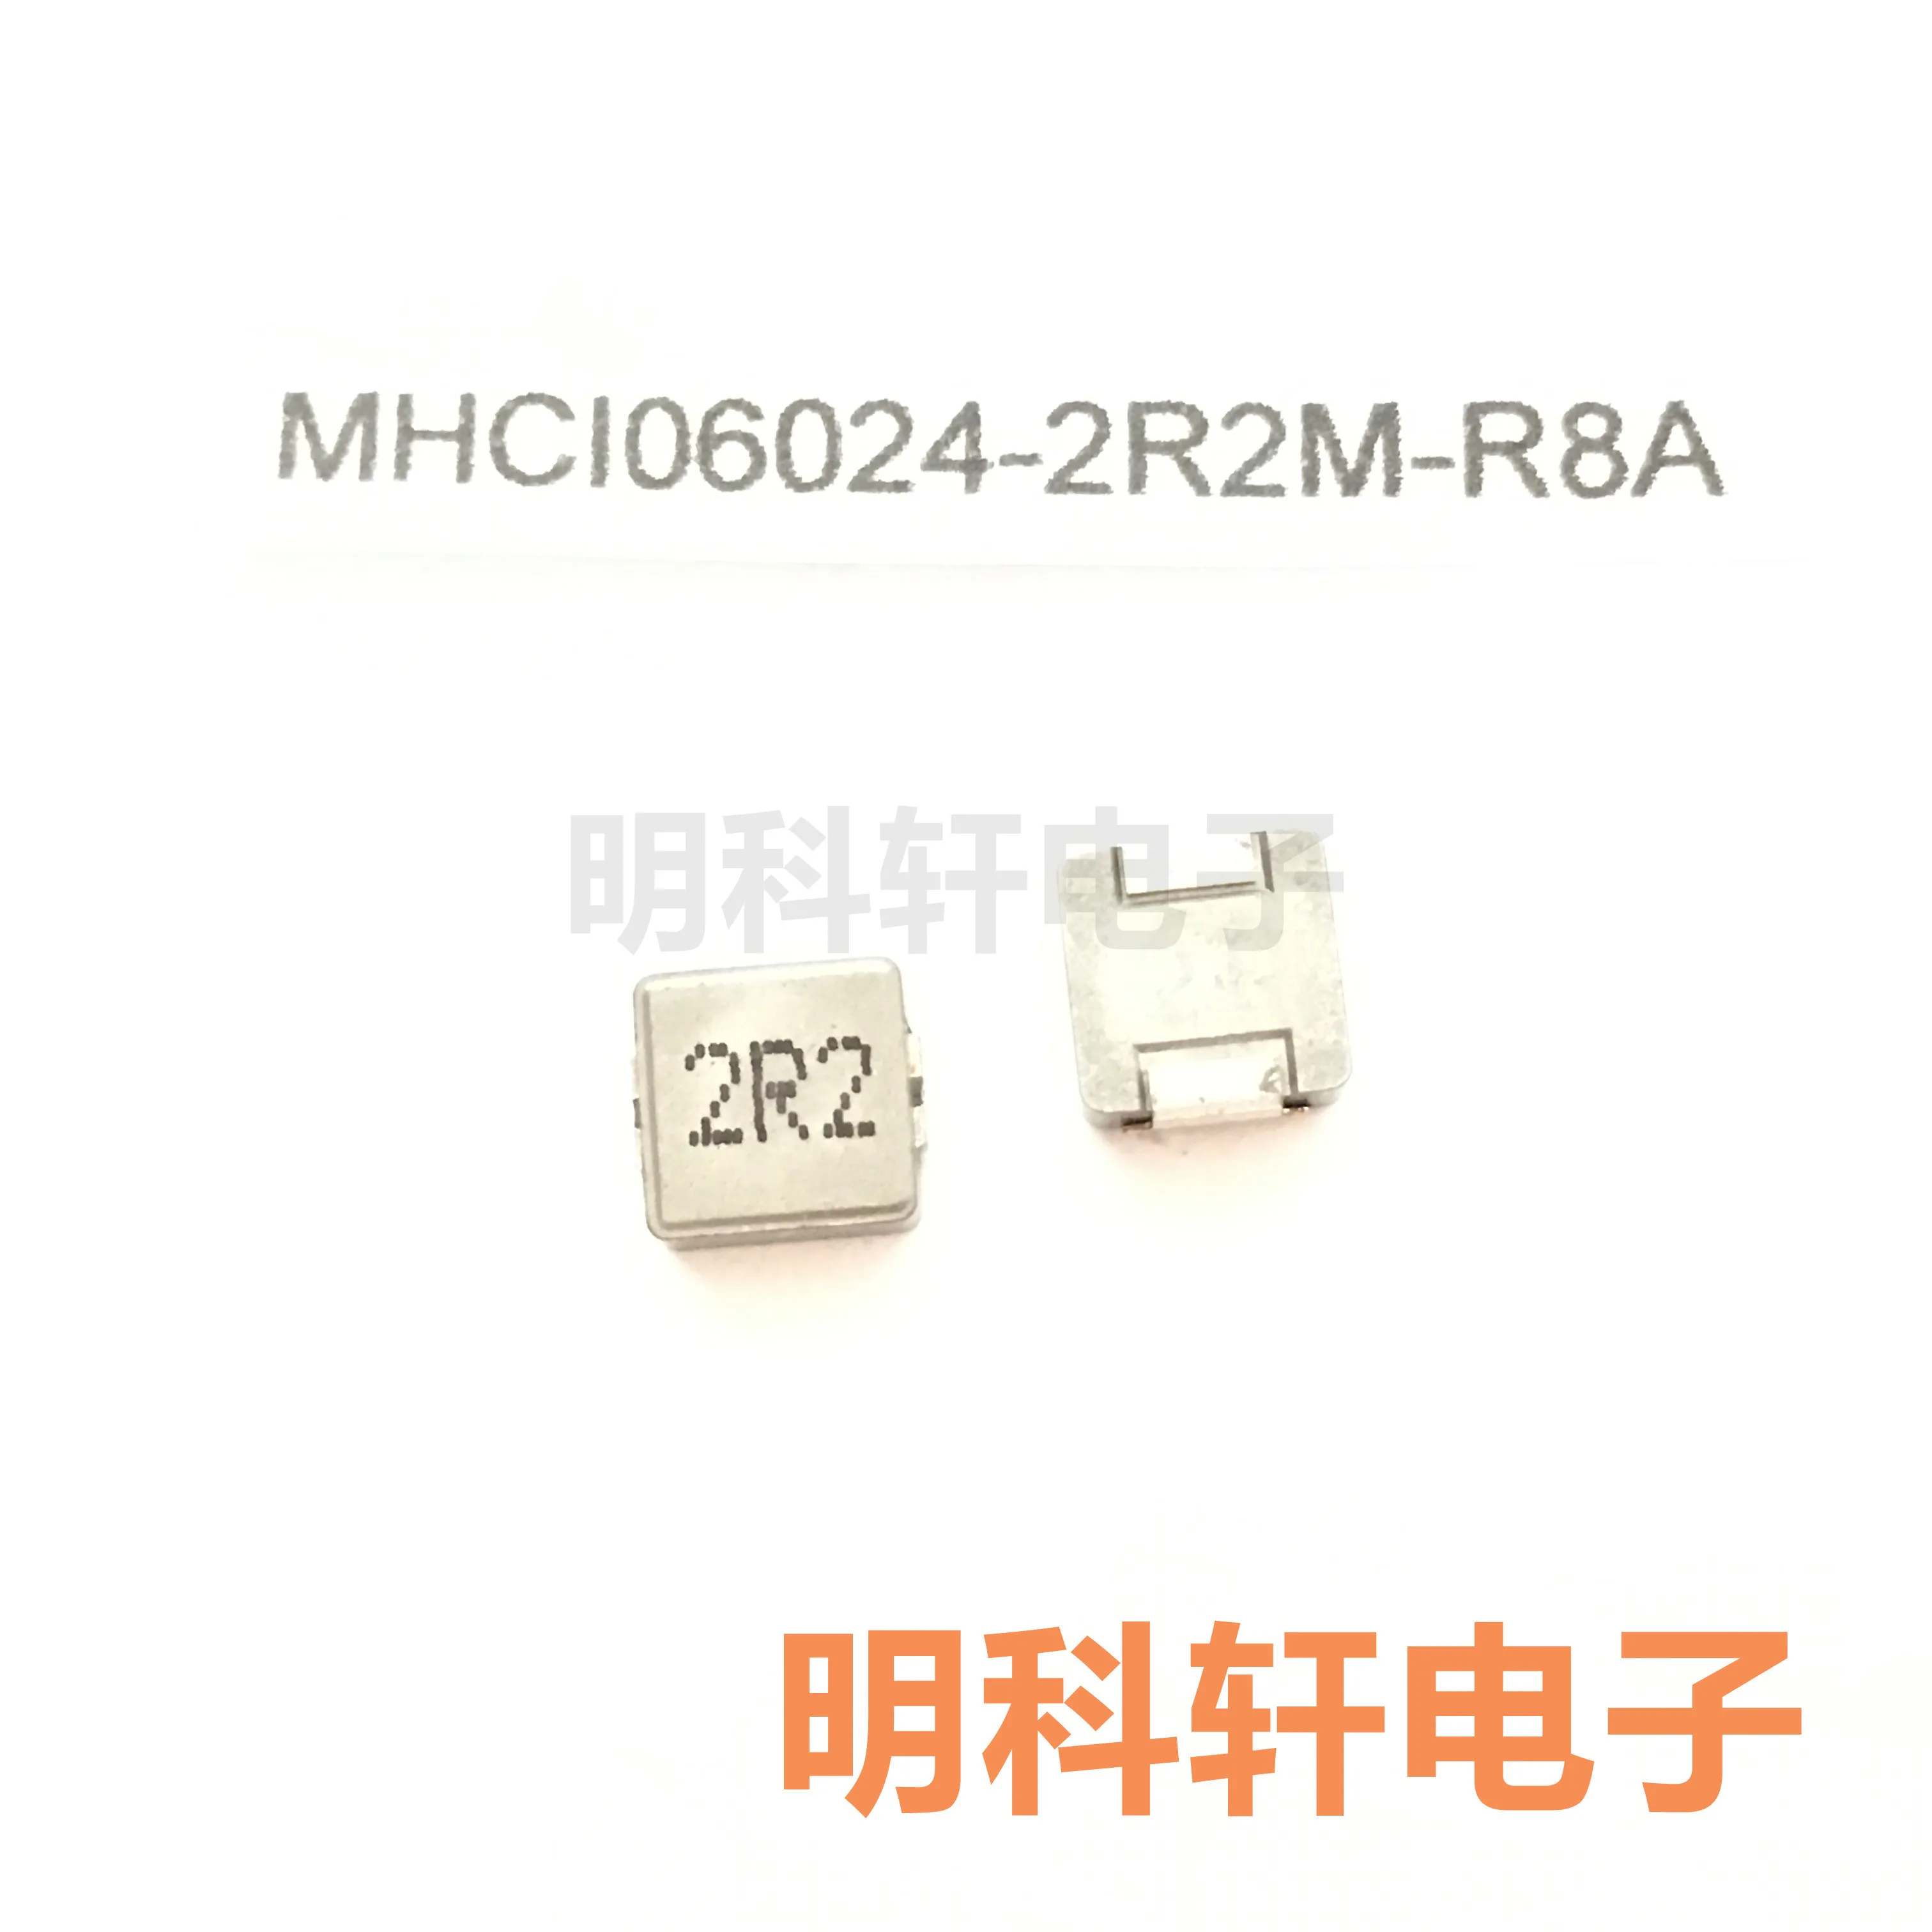 

30pcs orginal new MHCI06024-2R2M-R8A SMD integrated inductor 2.2UH